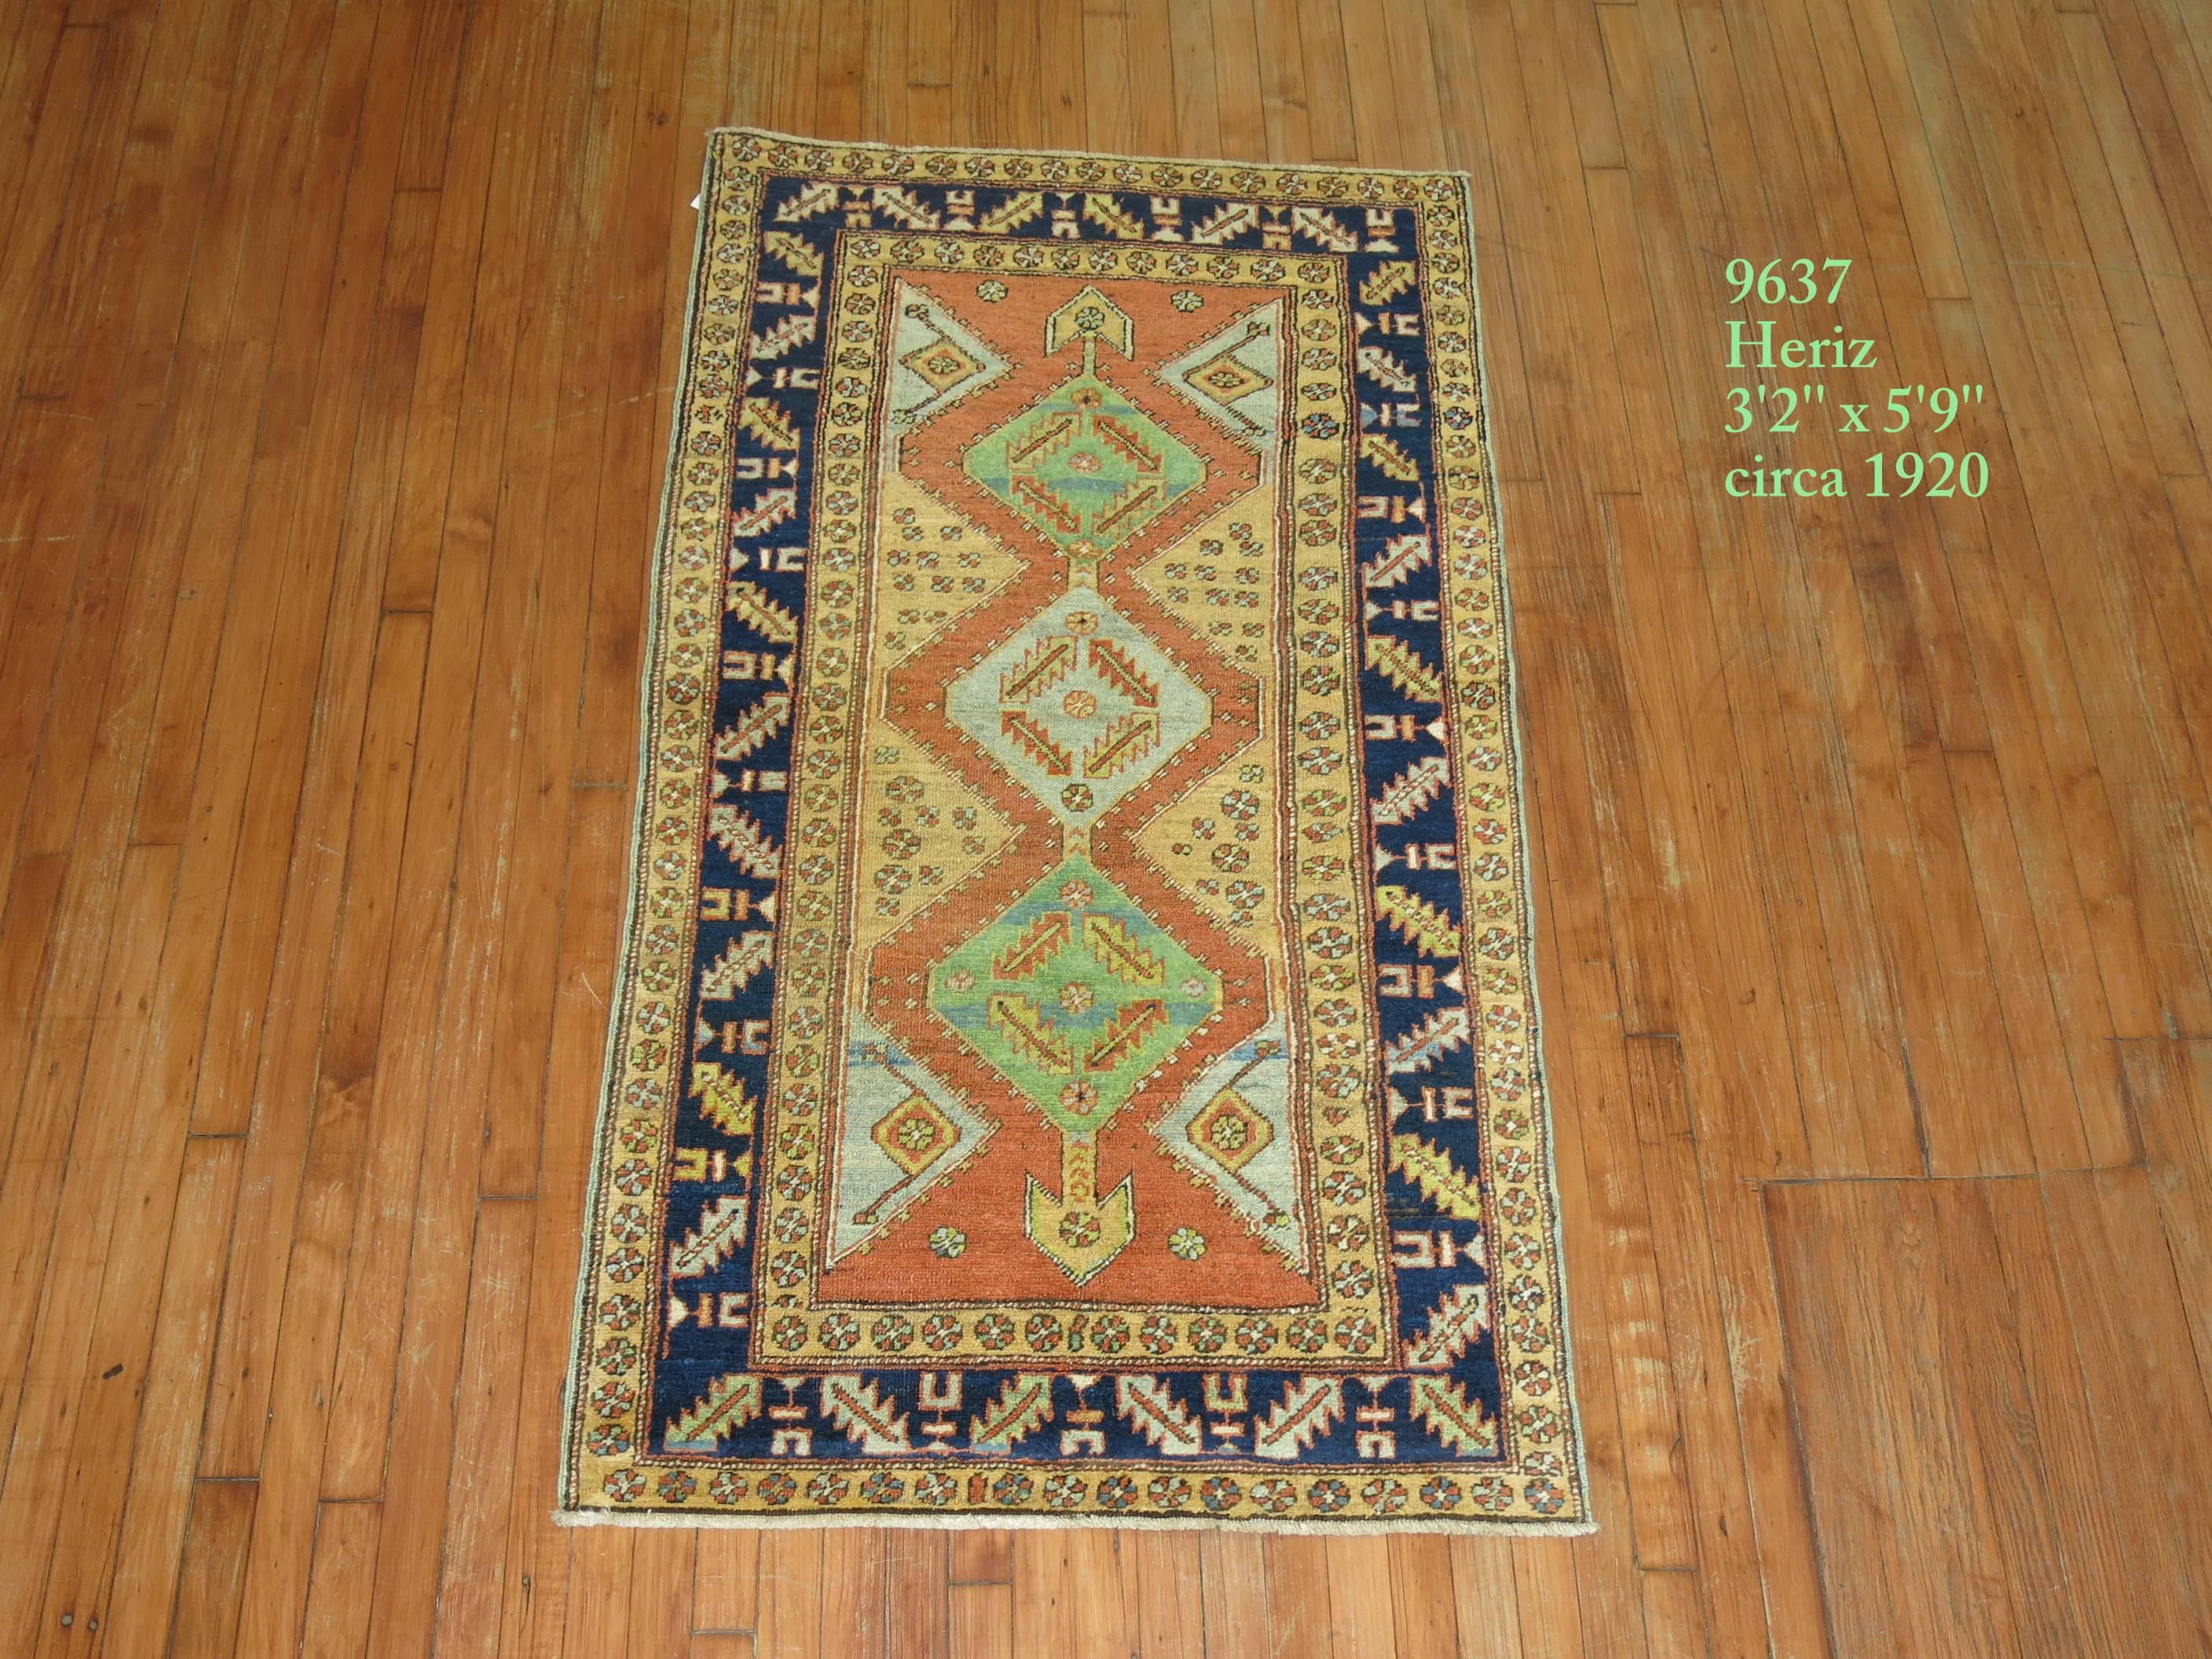 Colorful Persian Heriz Rug featuring a bright green accent color we seldom find. 

Heriz carpets are beloved for their versatility. Their geometry complements modern furnishings and their warm colors and artistic depth enhances antiques of all